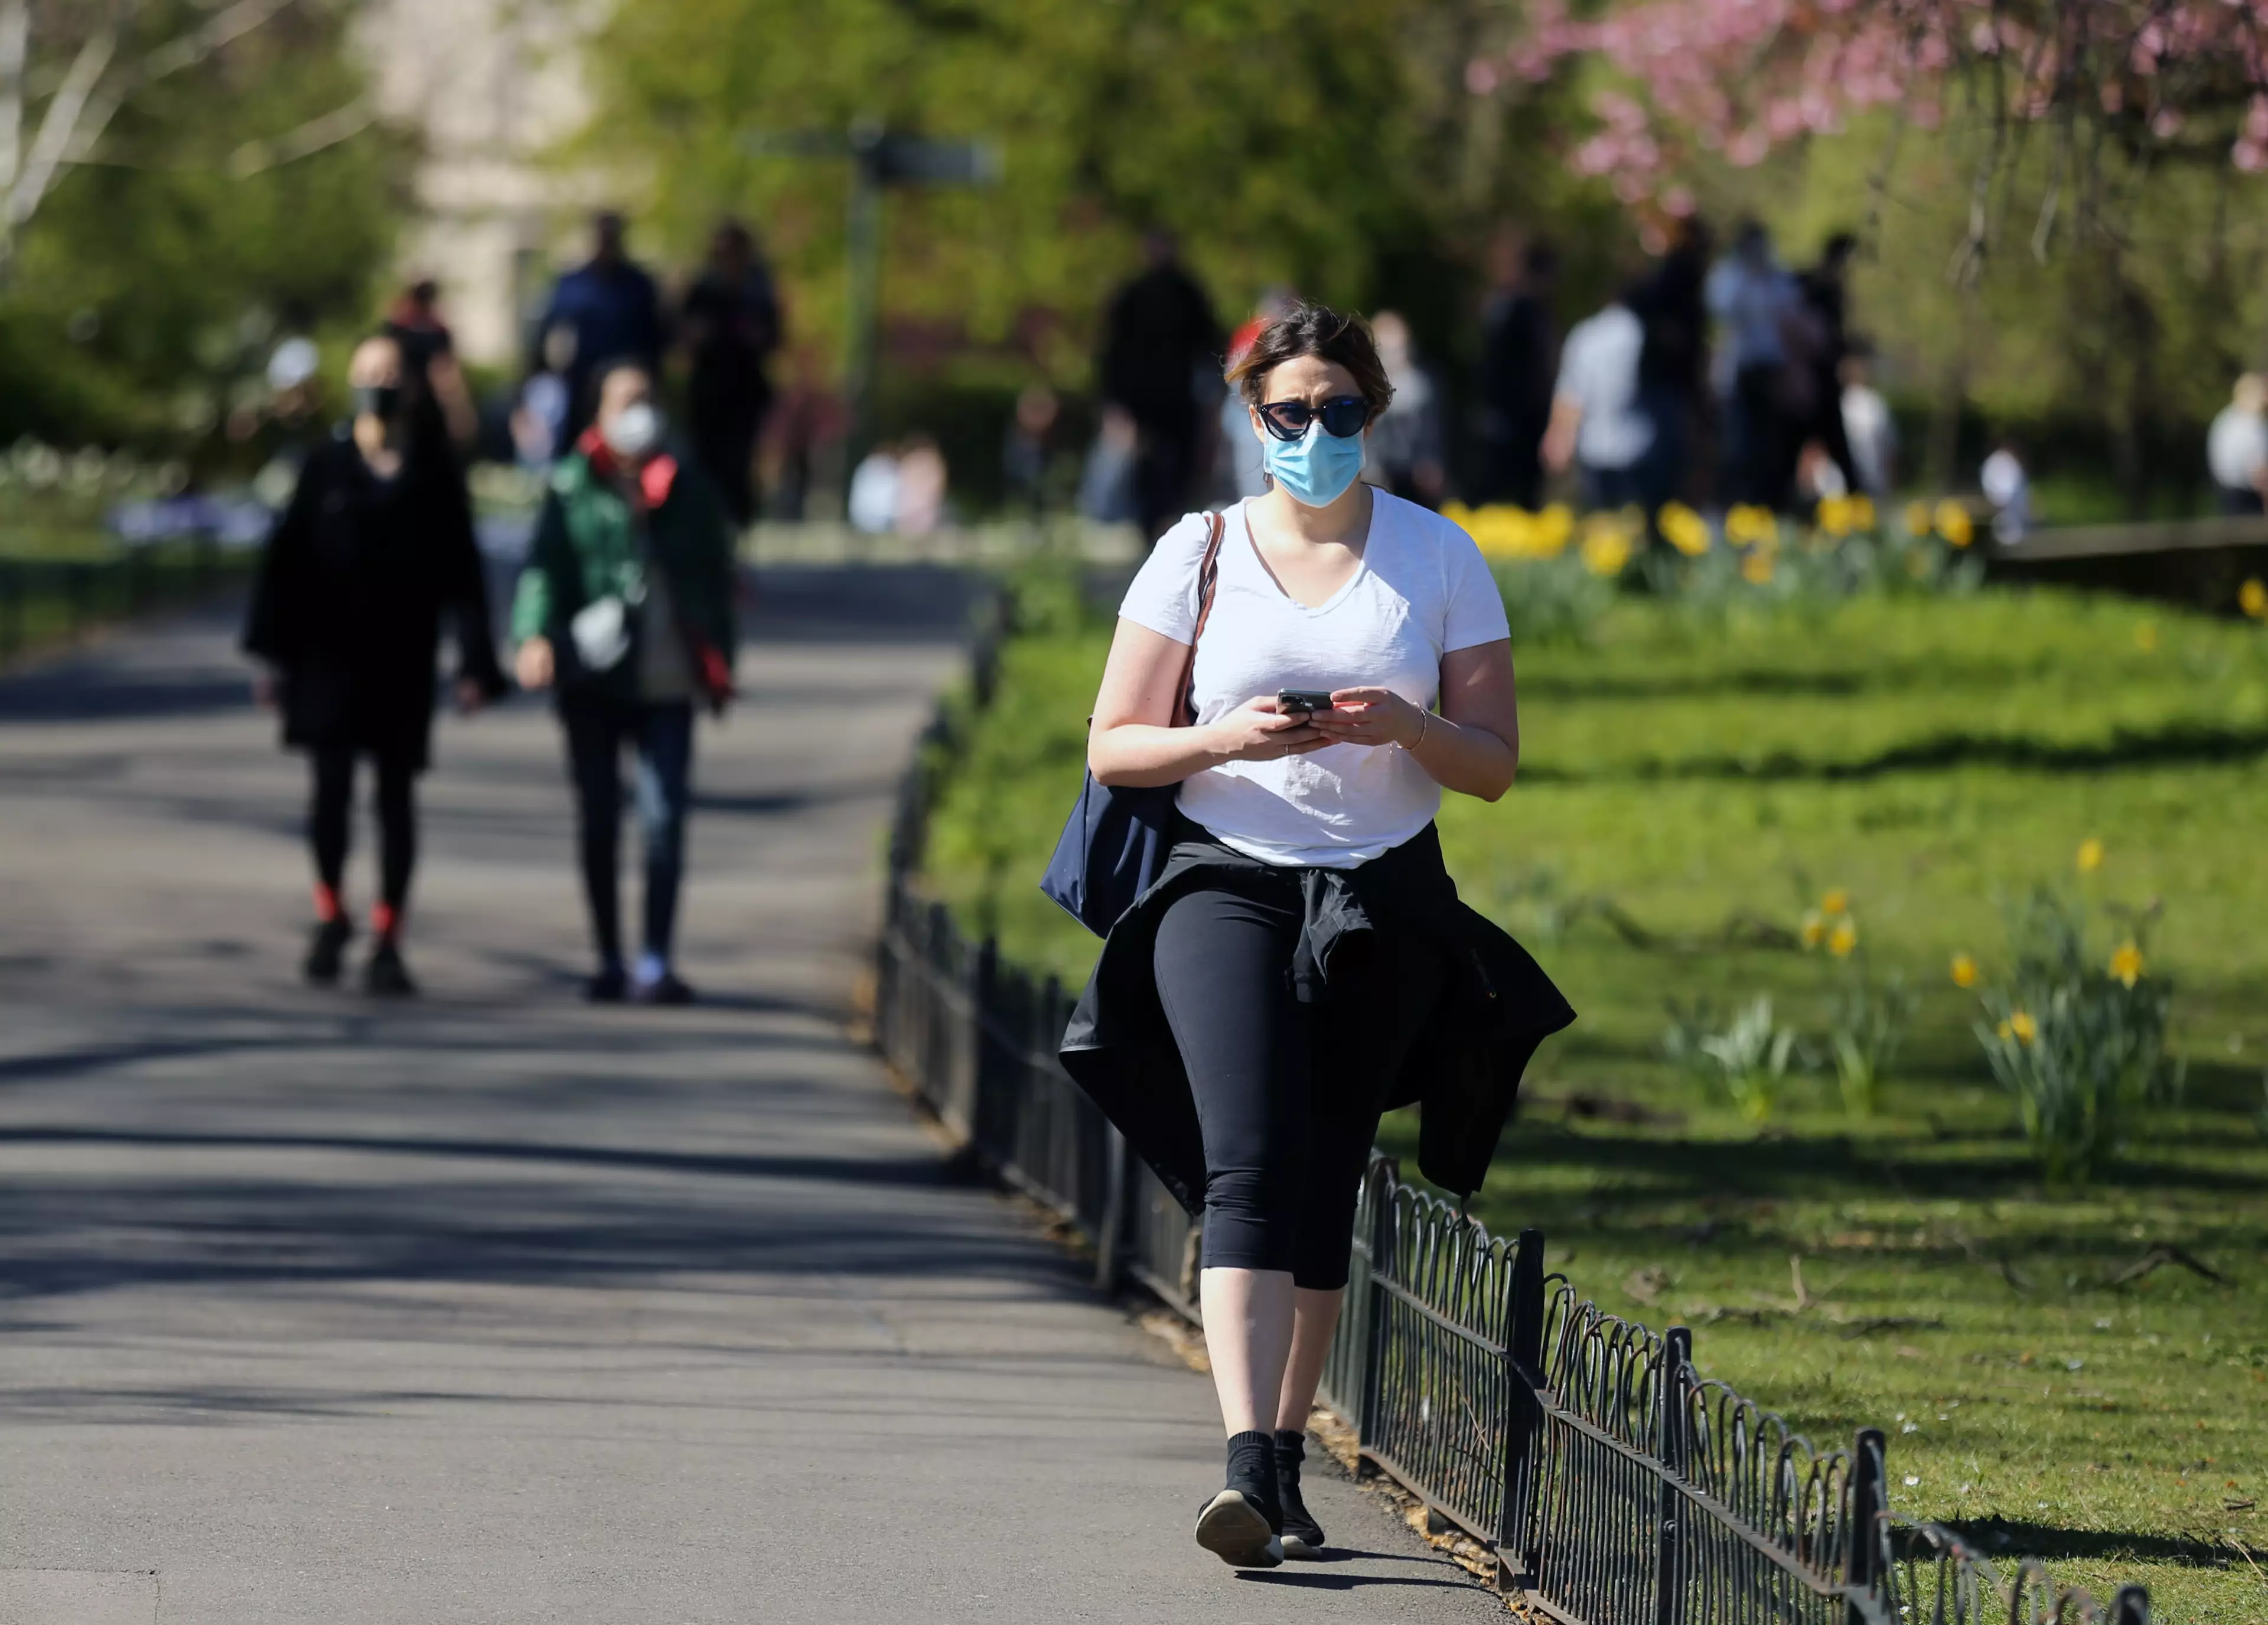 The UK is expected to enjoy a bout of warm weather next week.